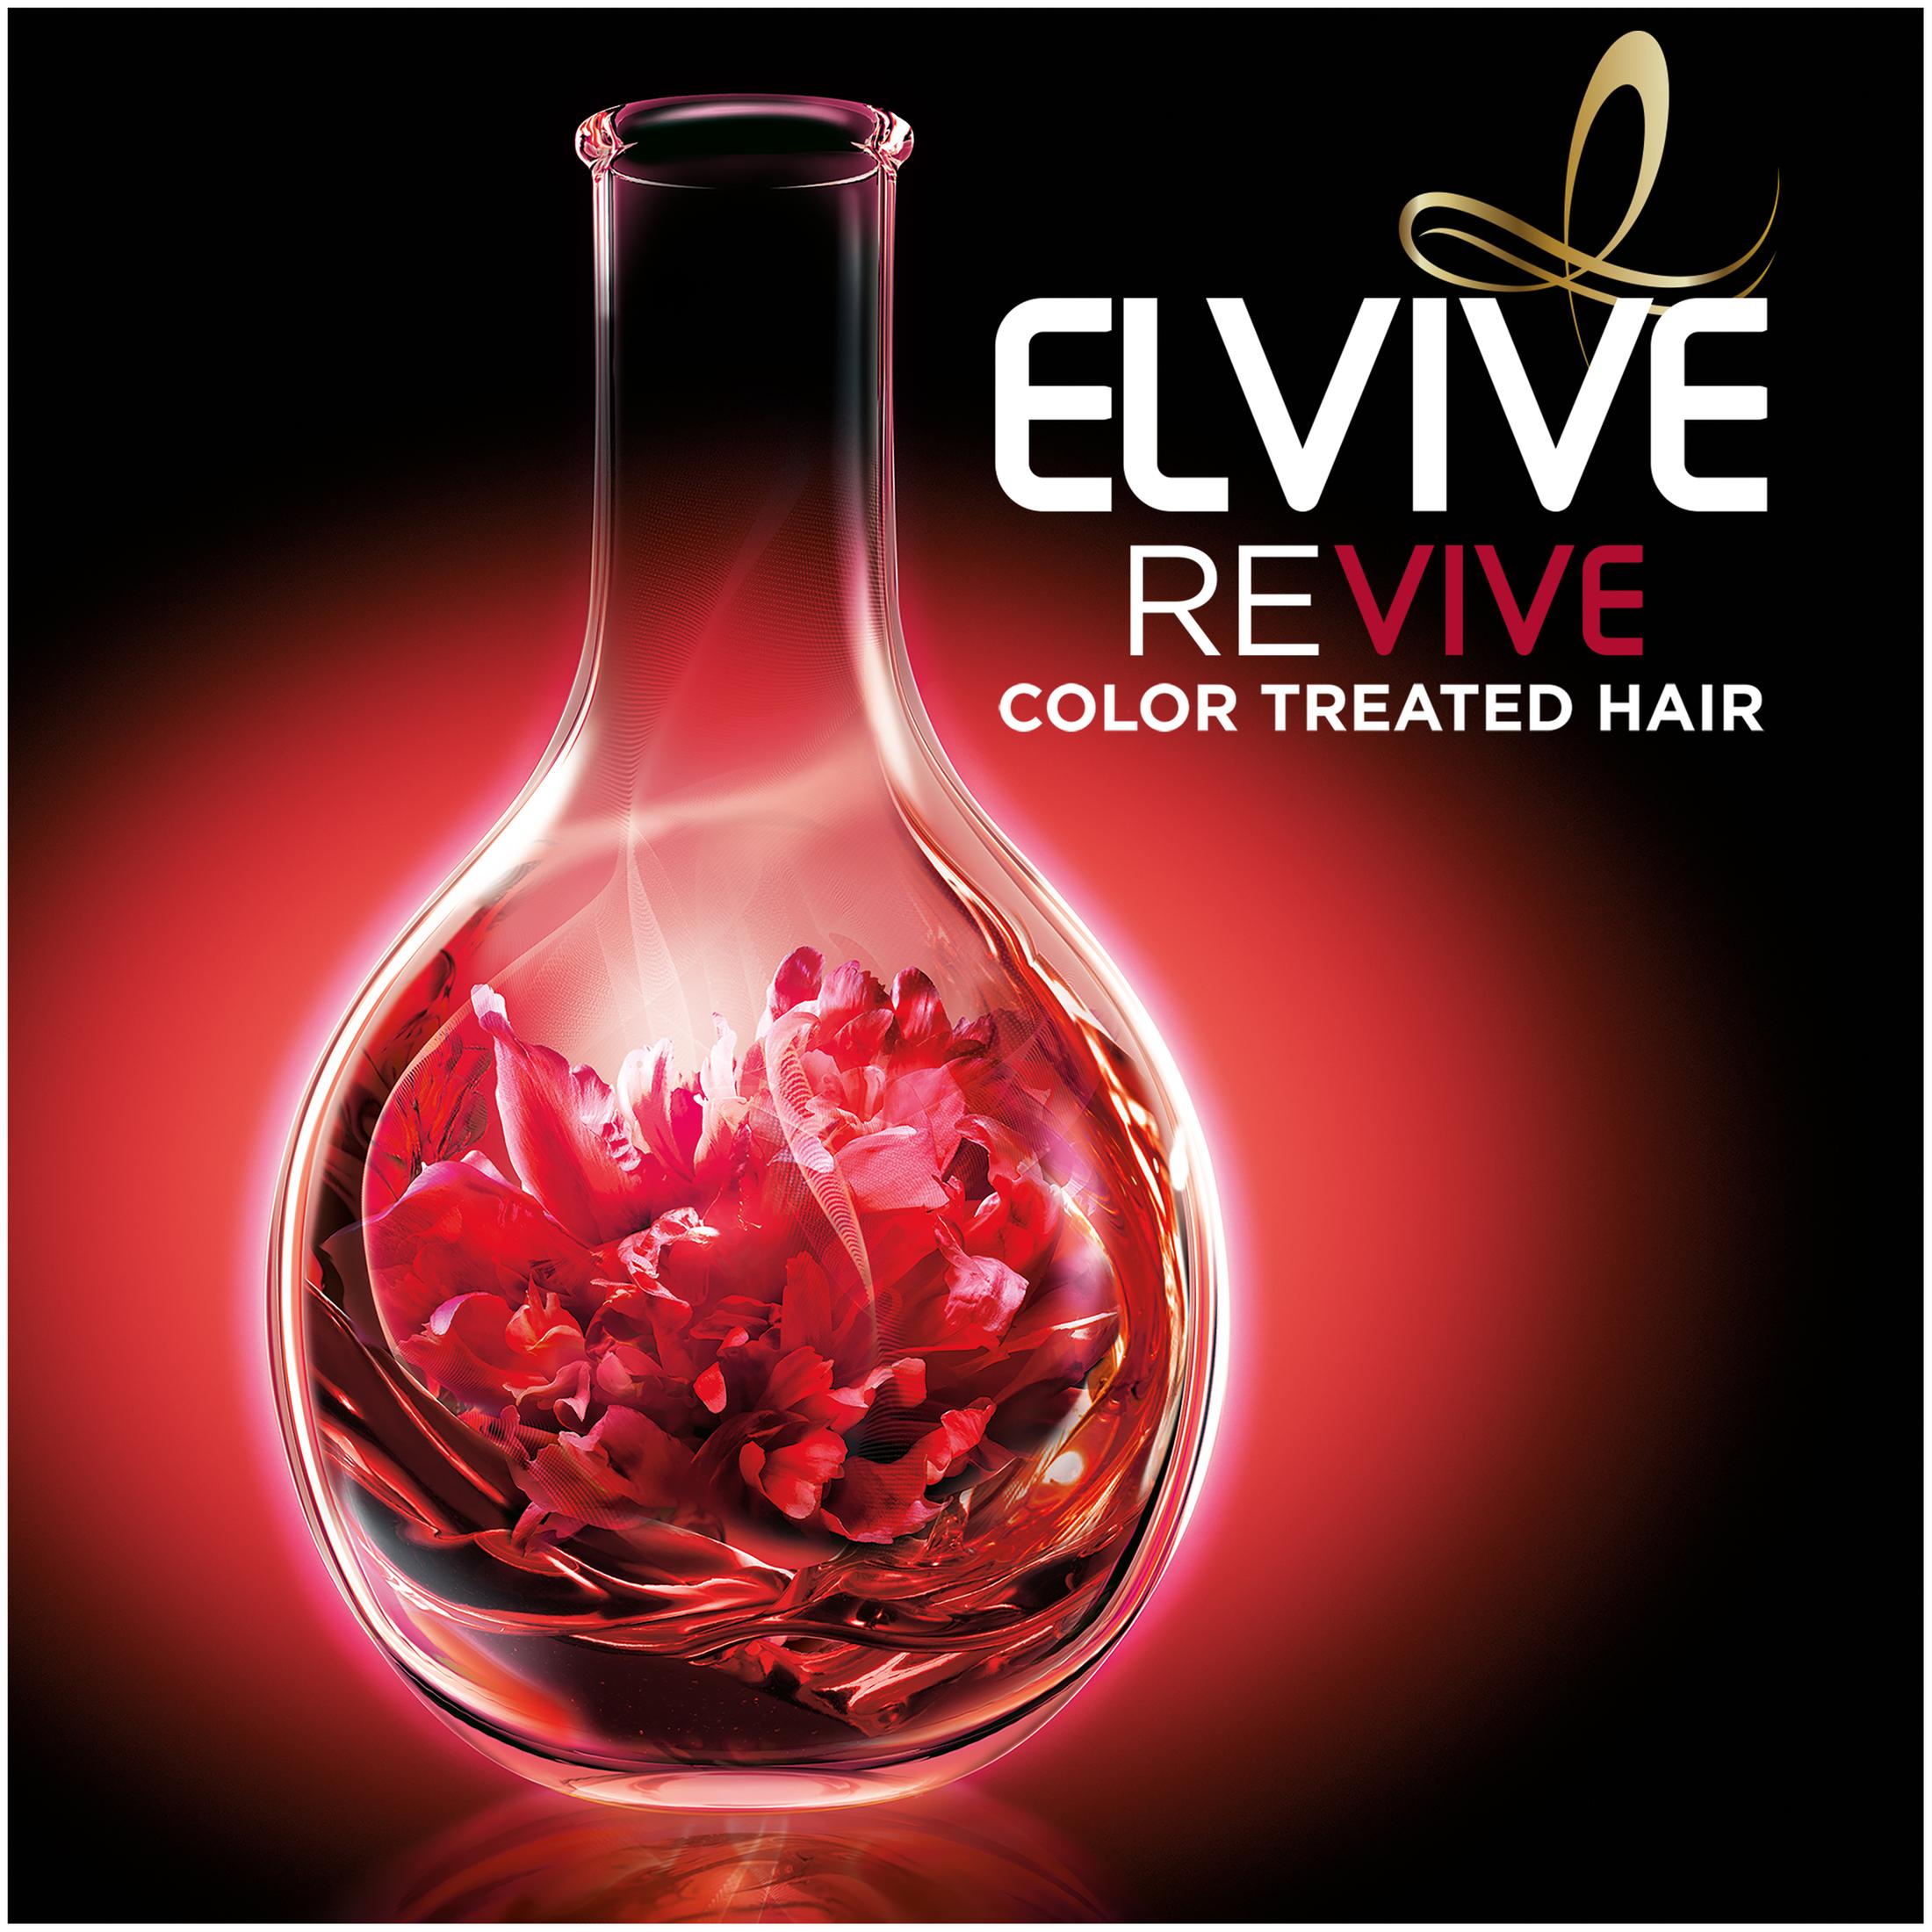 L'Oreal Elvive Color Vibrancy Protecting Conditioner with Linseed Elixir, 12.6 fl oz - image 5 of 7